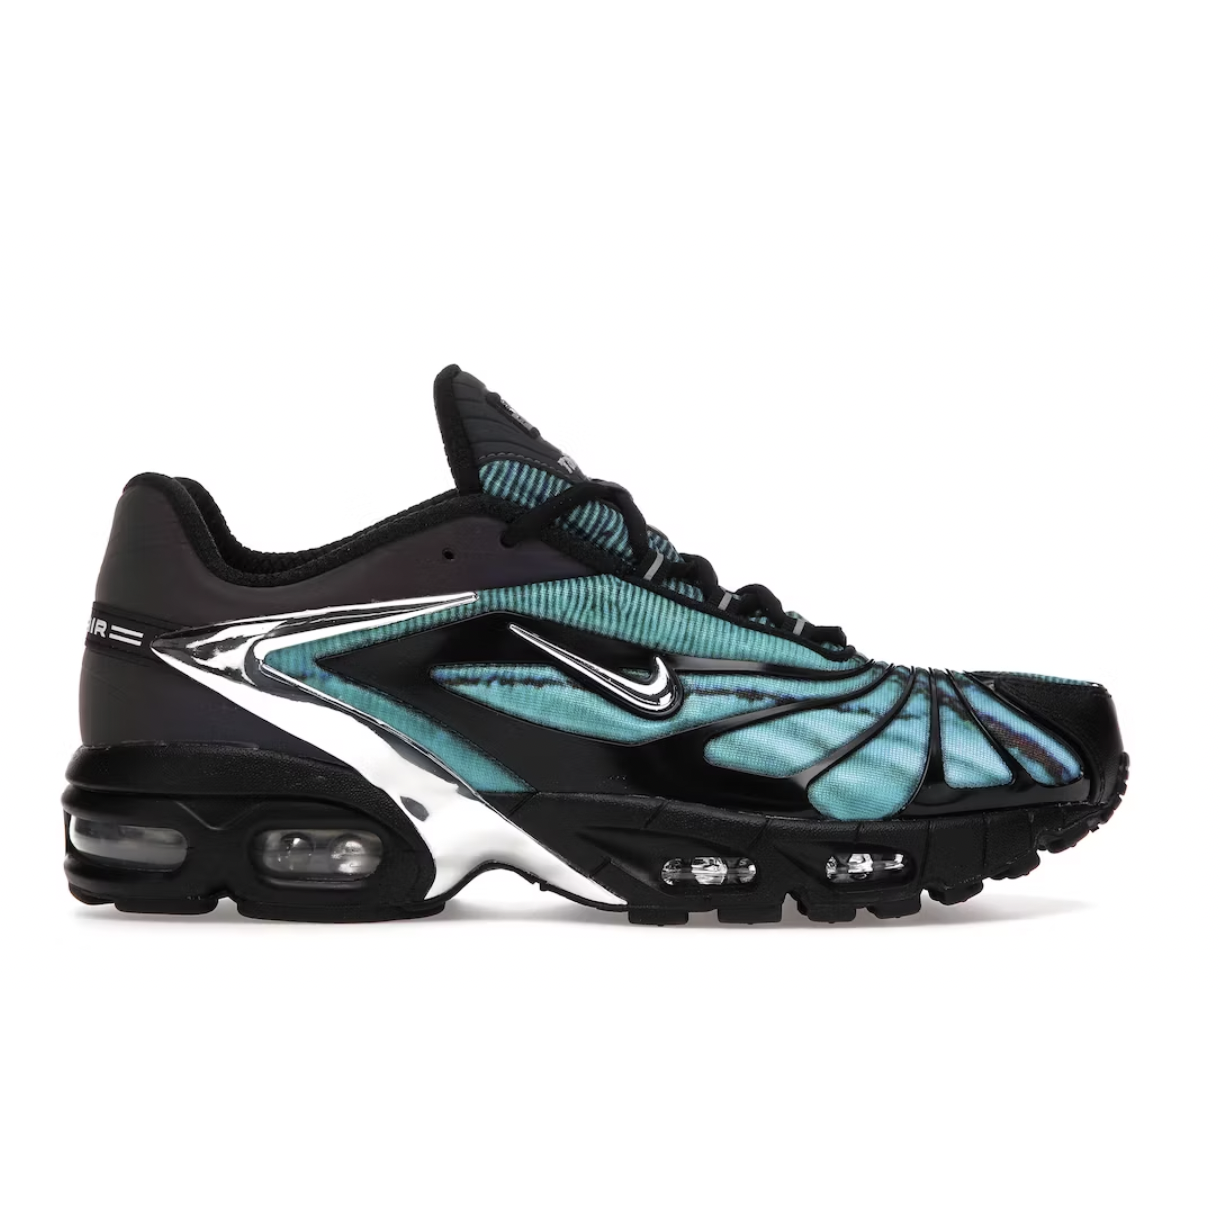 Nike Air Max Tailwind 5 Skepta by Nike from £350.00